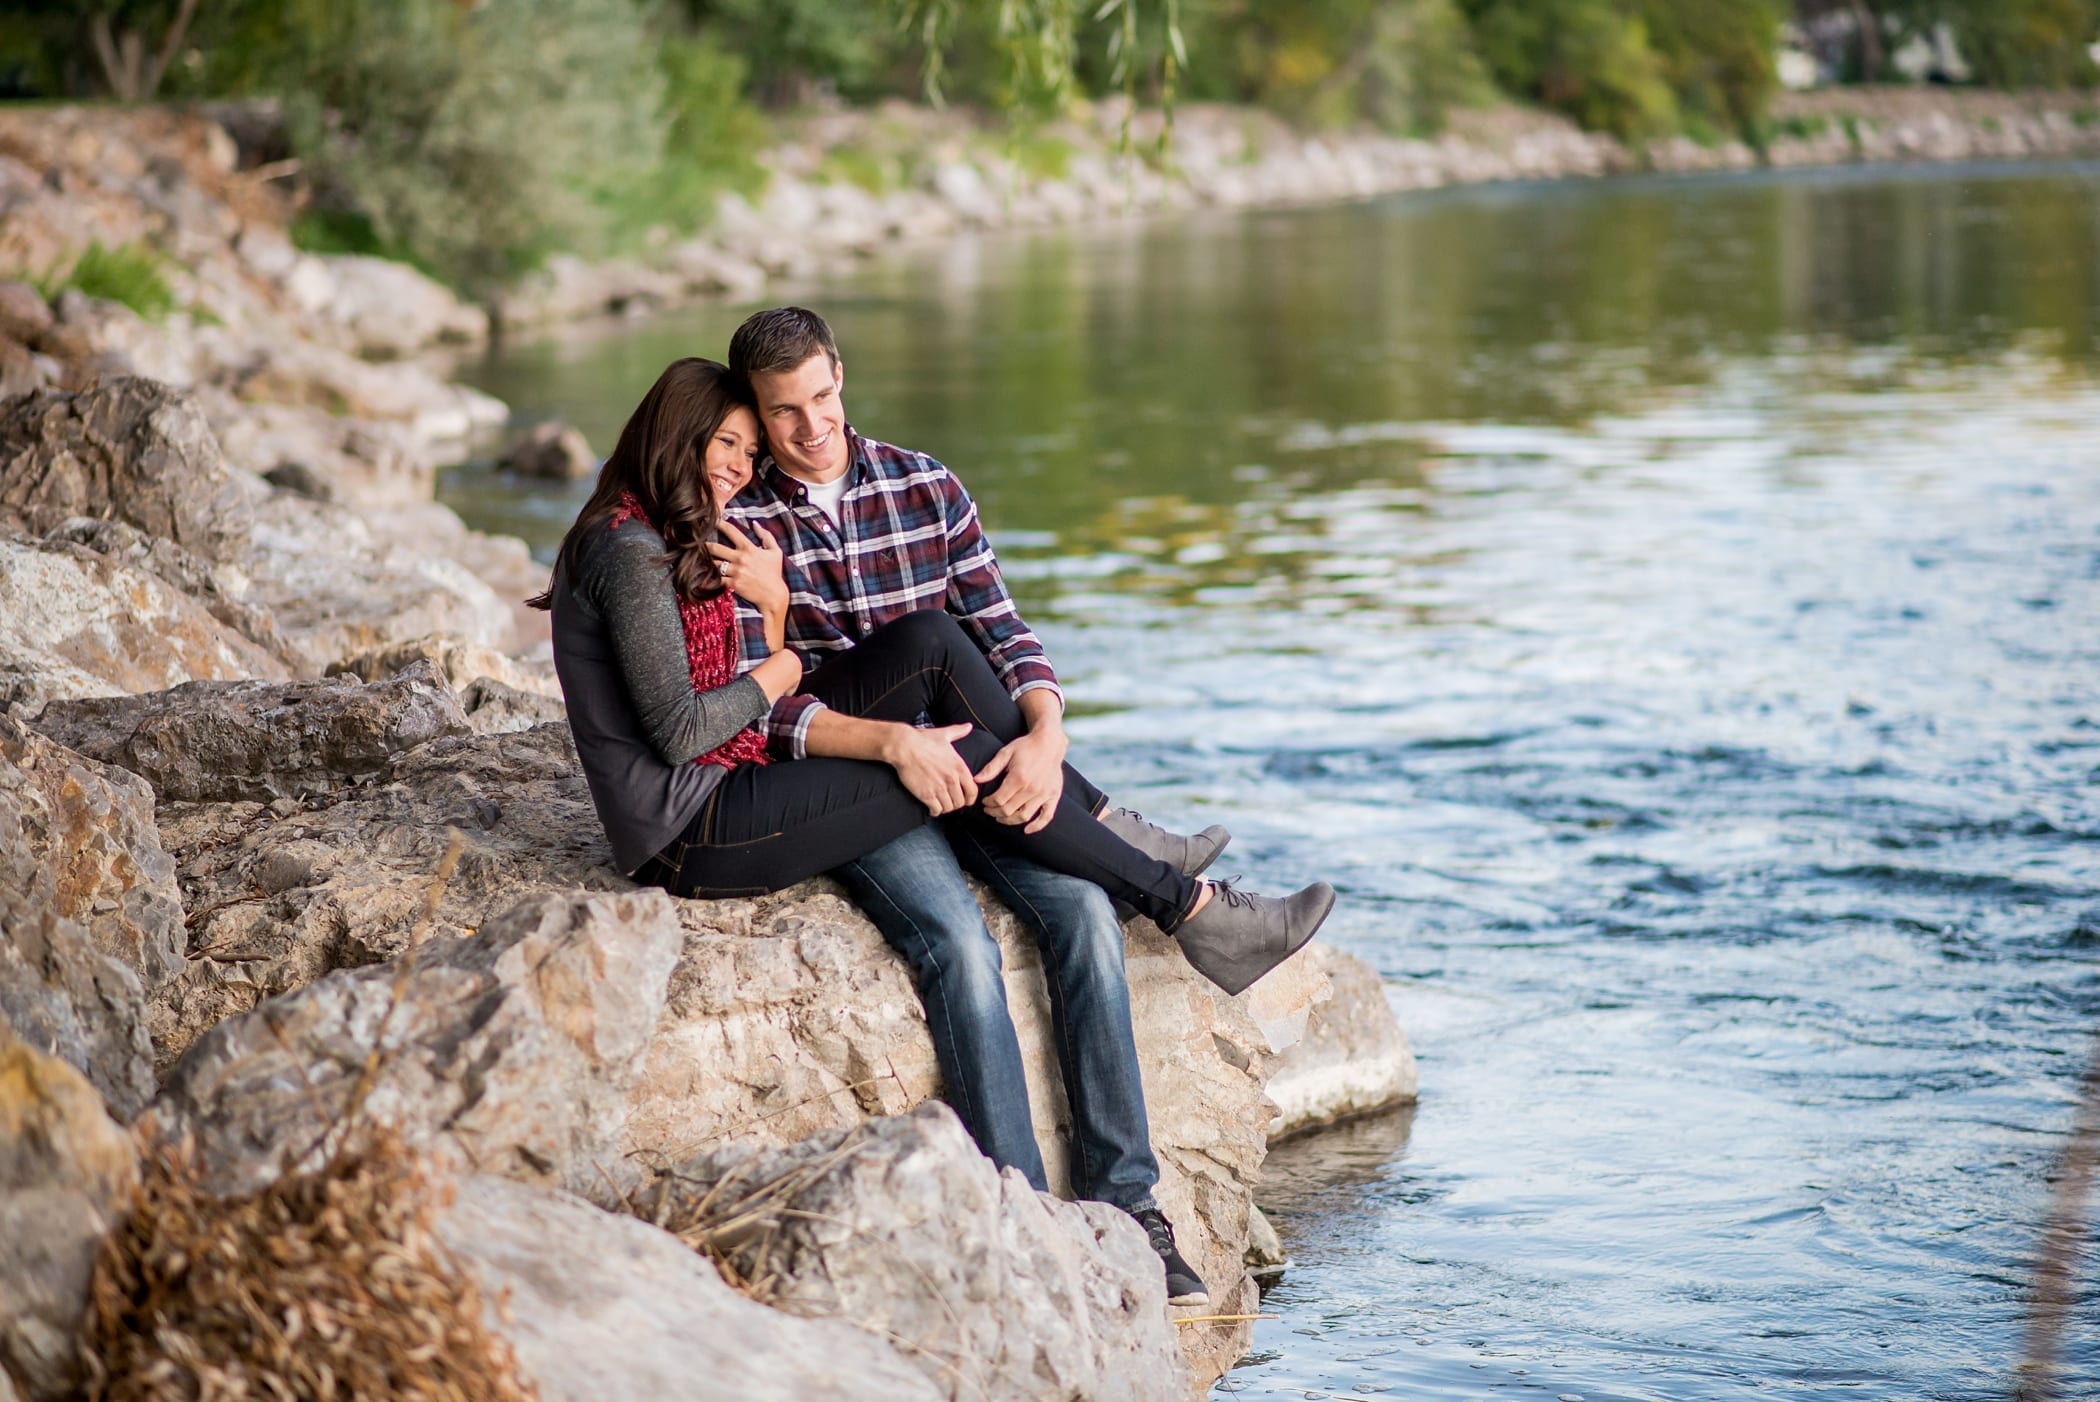 Idaho Mountain Fall Engagements by Michelle & logan Photo+Films